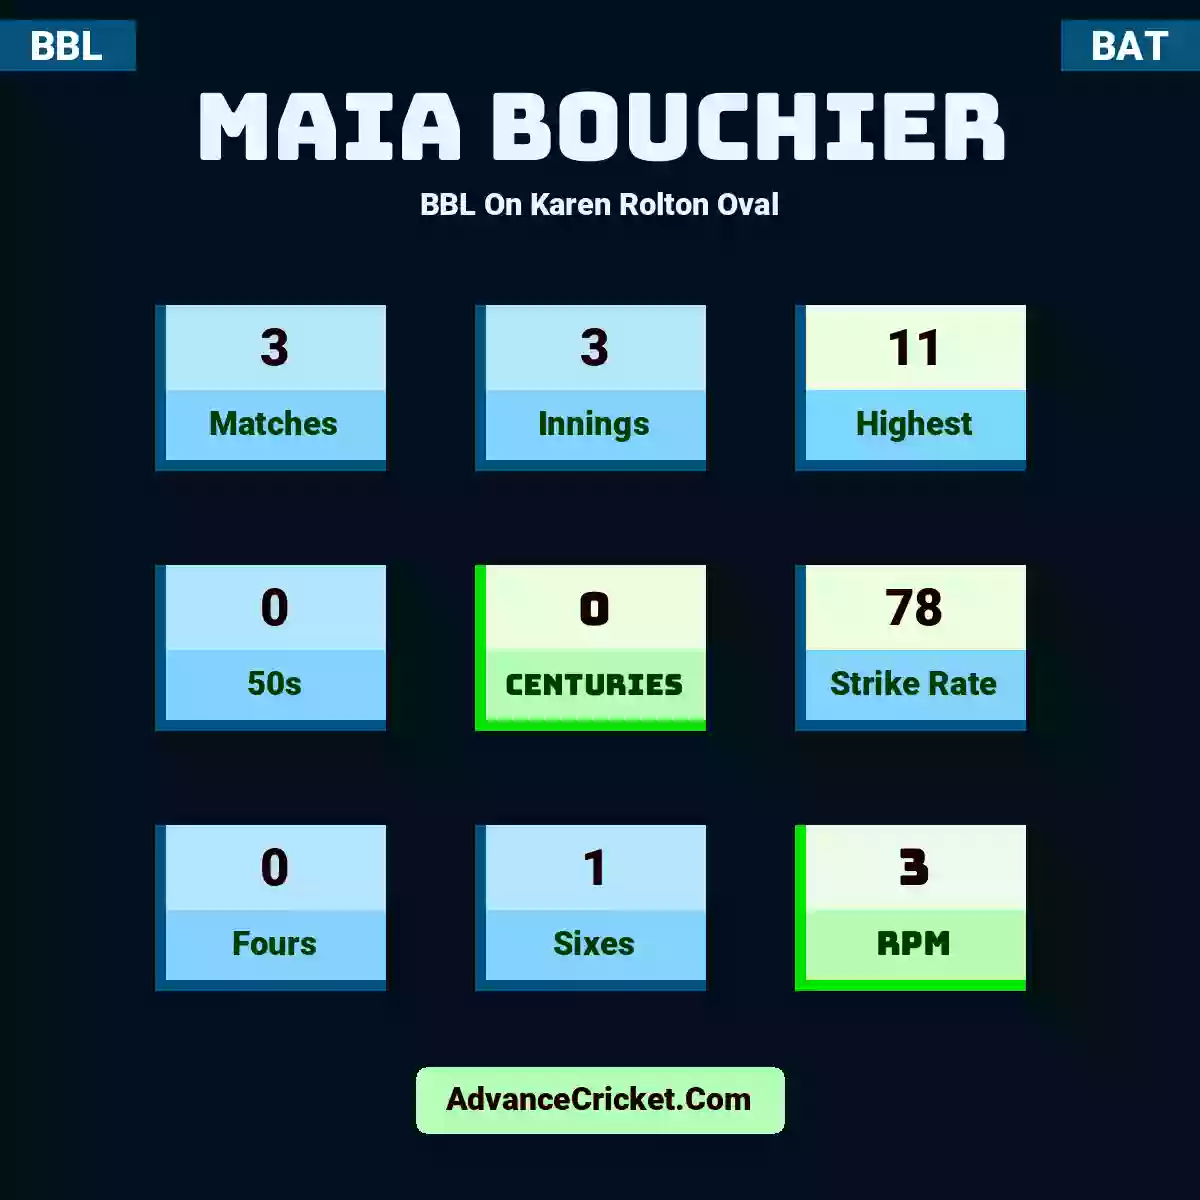 Maia Bouchier BBL  On Karen Rolton Oval, Maia Bouchier played 3 matches, scored 11 runs as highest, 0 half-centuries, and 0 centuries, with a strike rate of 78. M.Bouchier hit 0 fours and 1 sixes, with an RPM of 3.